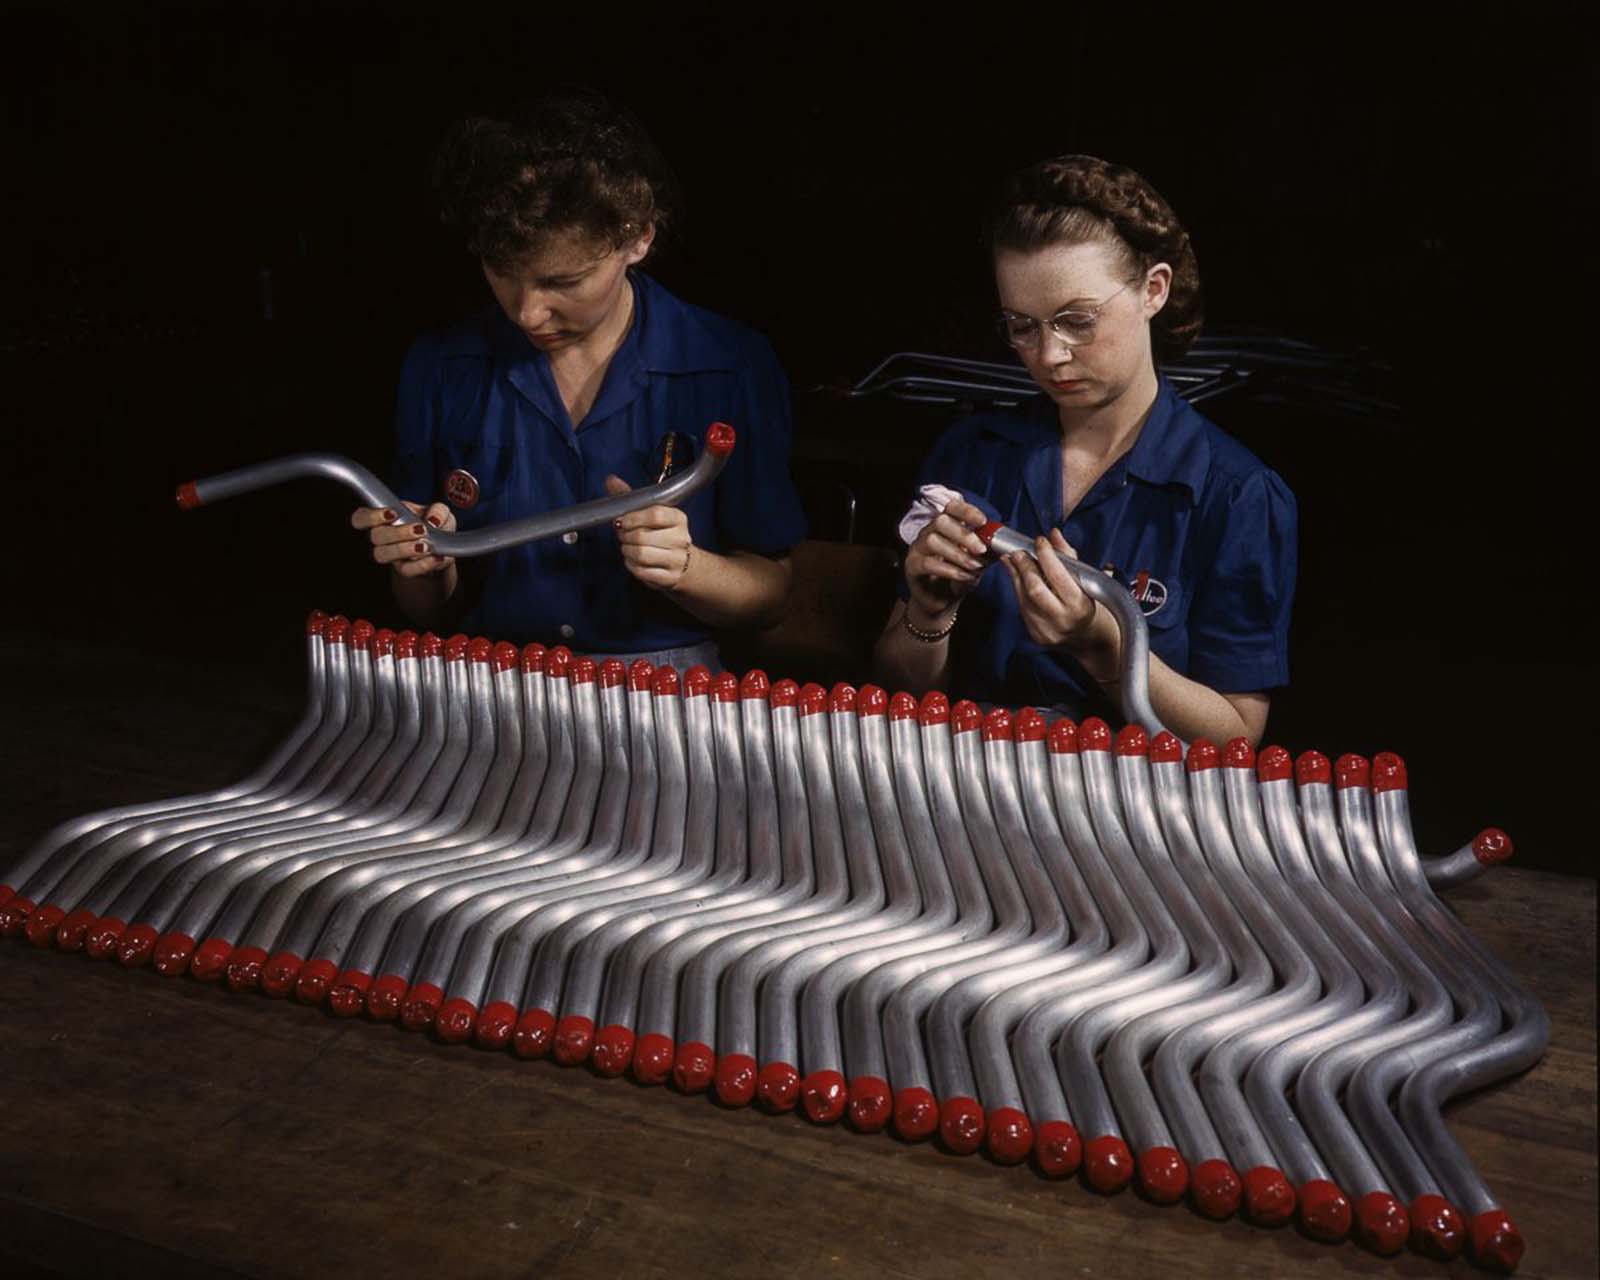 Workers cap and inspect tubing for the A-31 “Vengeance” dive bomber at the Vultee plant in Nashville, Tennessee, 1943.